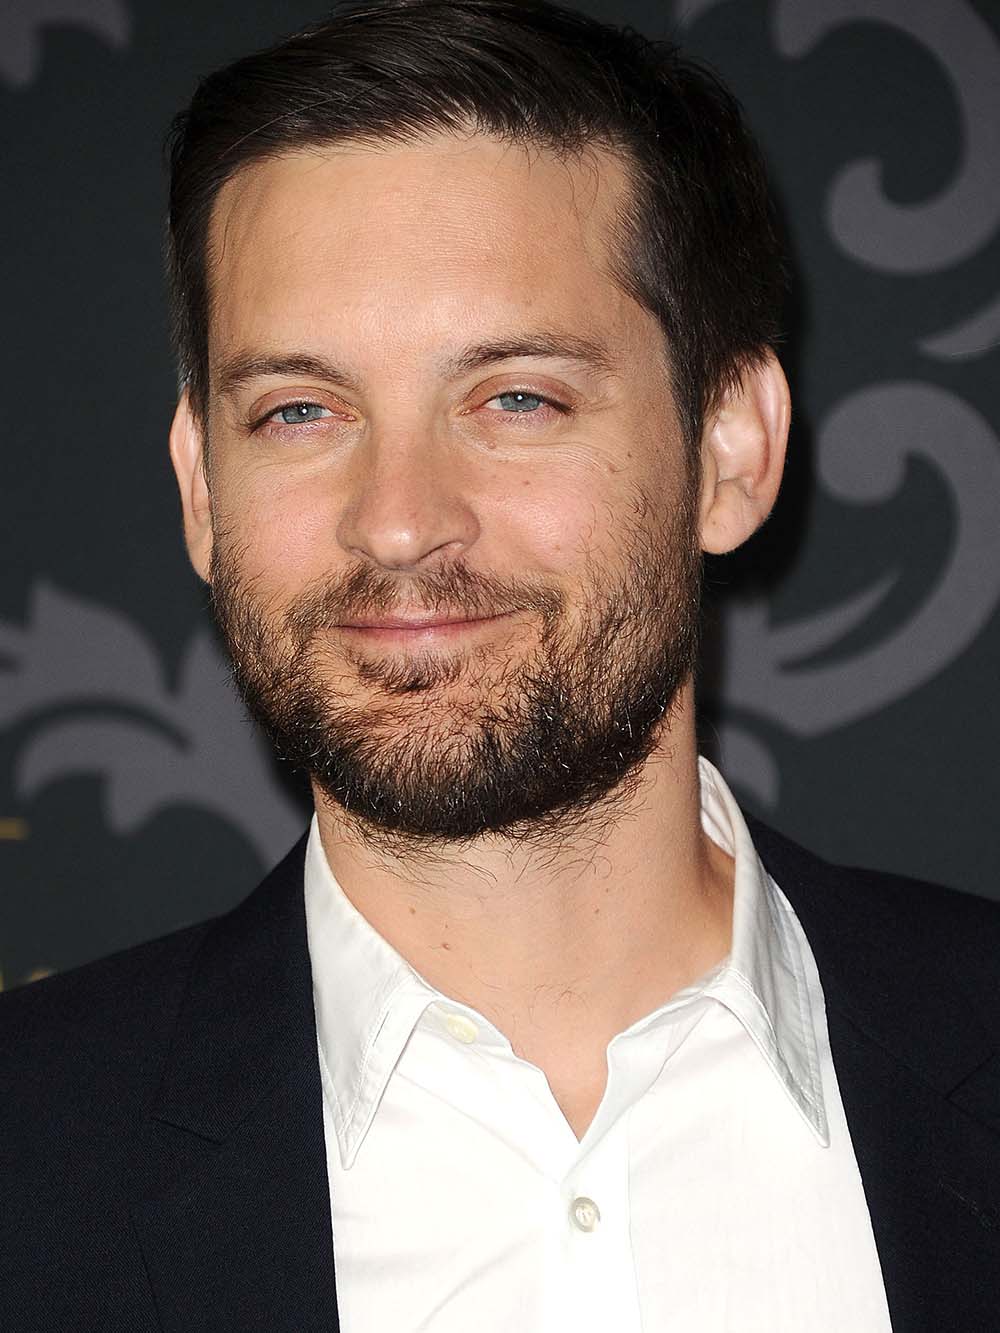 Tobey Maguire: Life Beyond Spider-Man